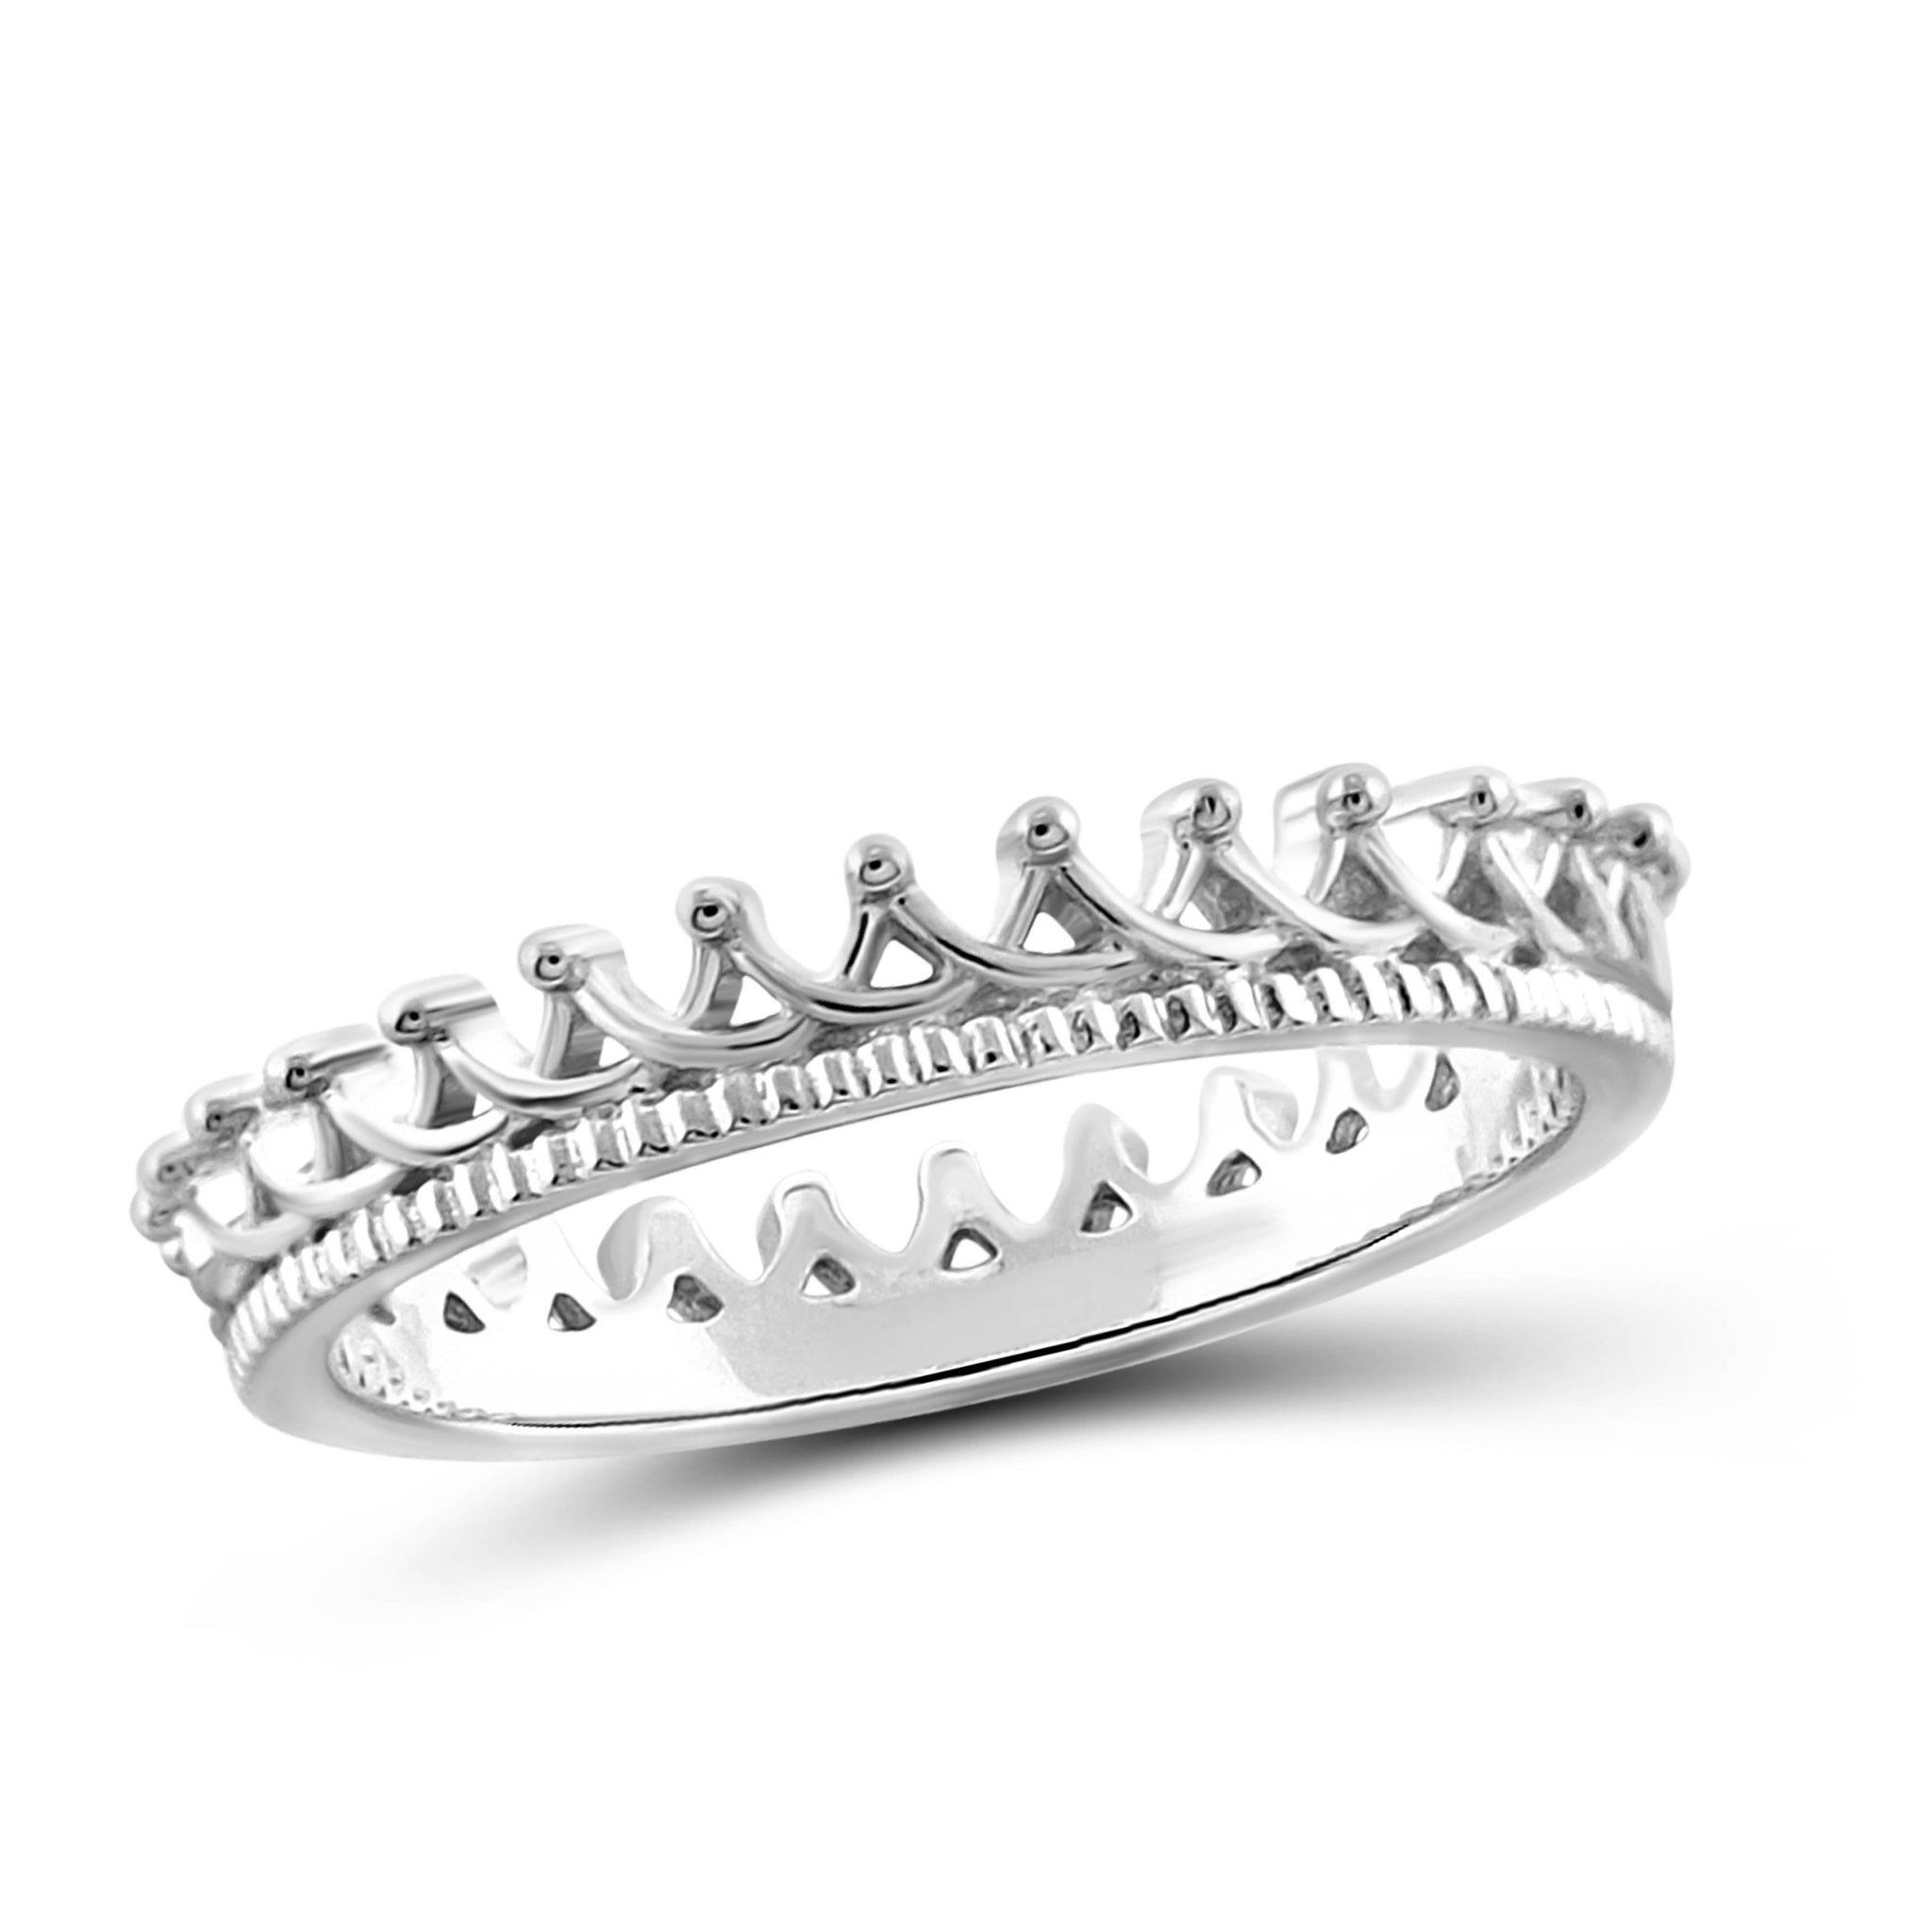 JewelonFire Sterling Silver Sleek Imperial Crown Ring - Assorted Colors